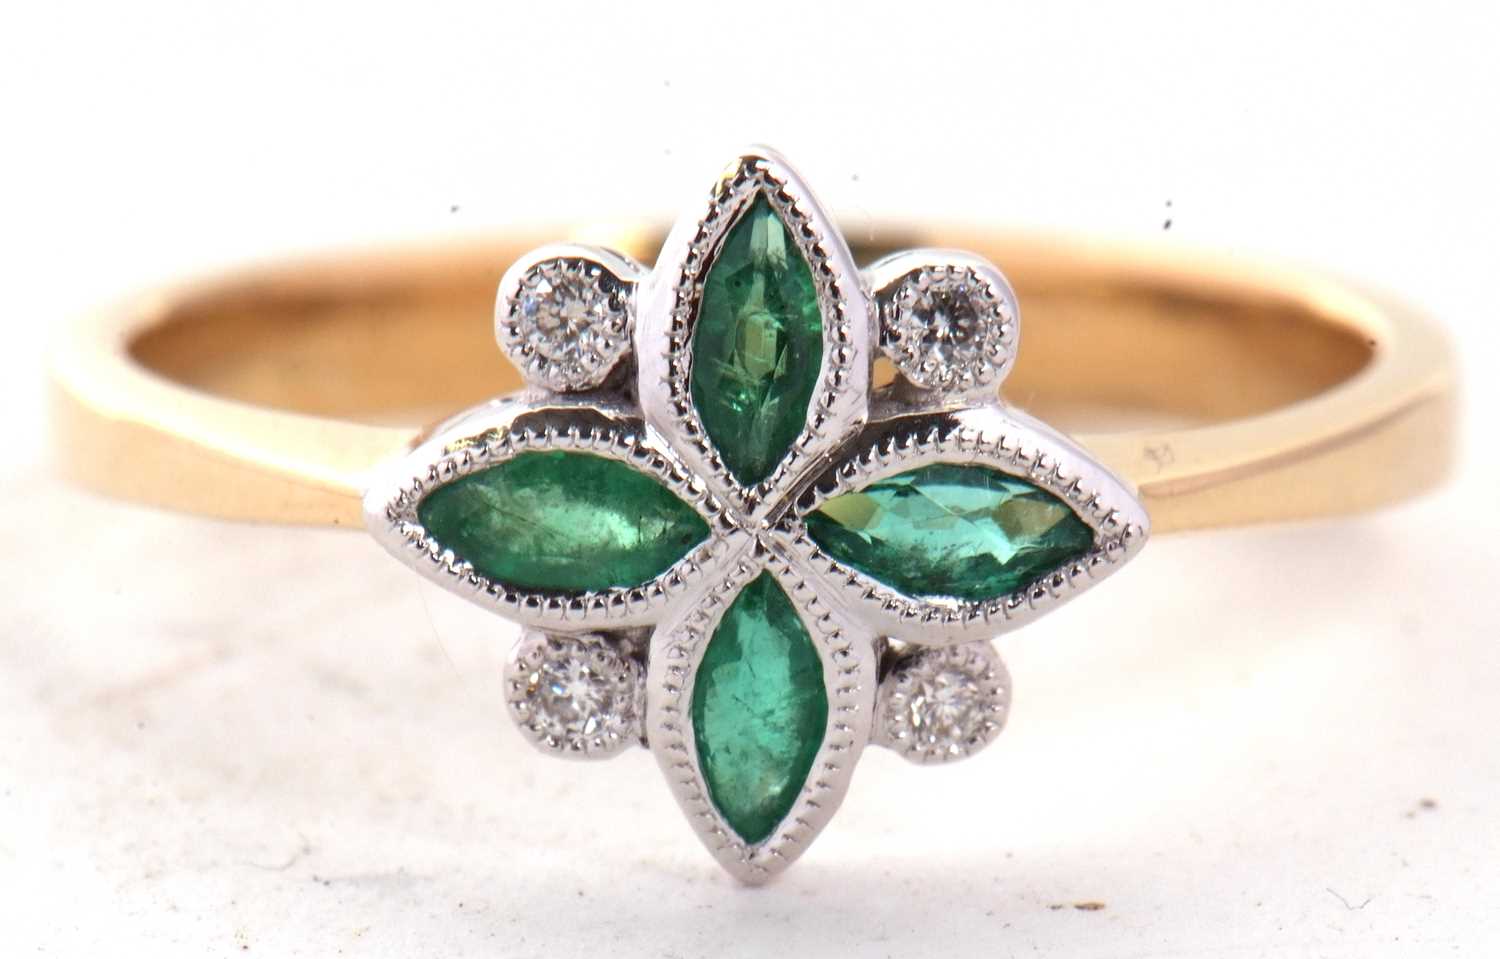 An 18ct emerald and diamond ring, the four marquise shape emeralds interspaced with small round